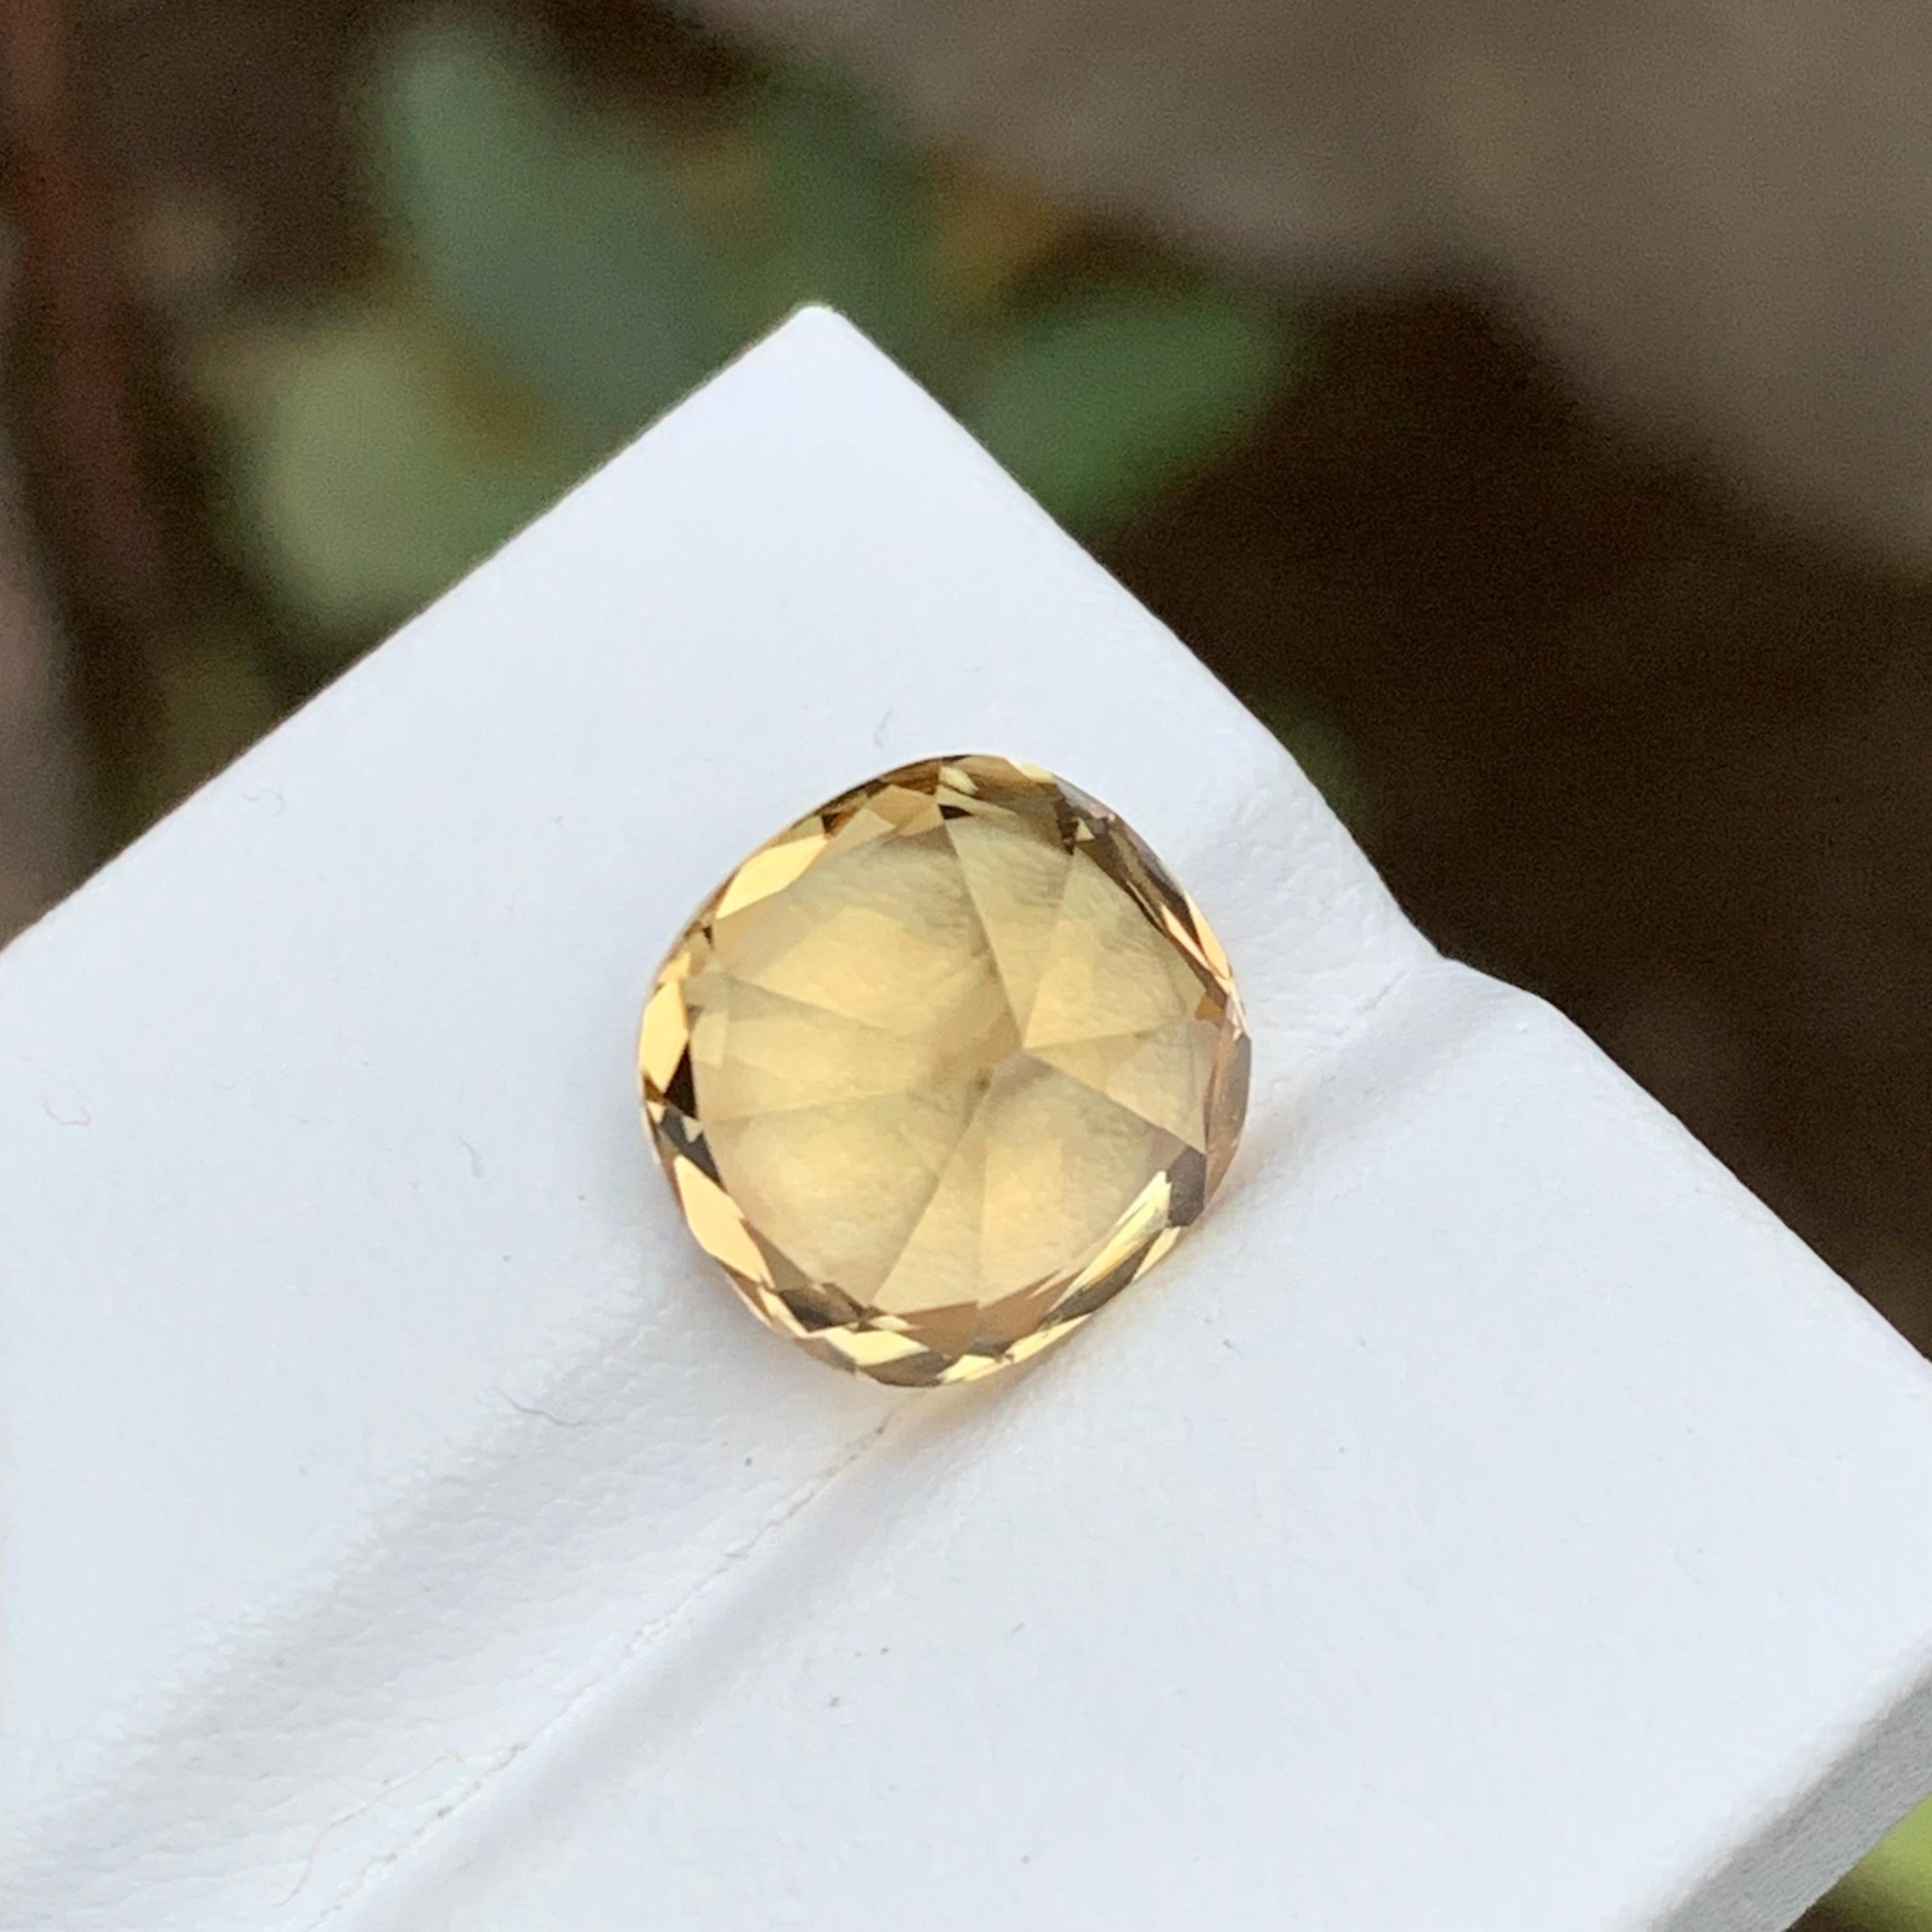 Golden Yellow Natural Tourmaline Gemstone, 6.75 Ct Cushion Cut for Ring/Pendant For Sale 7